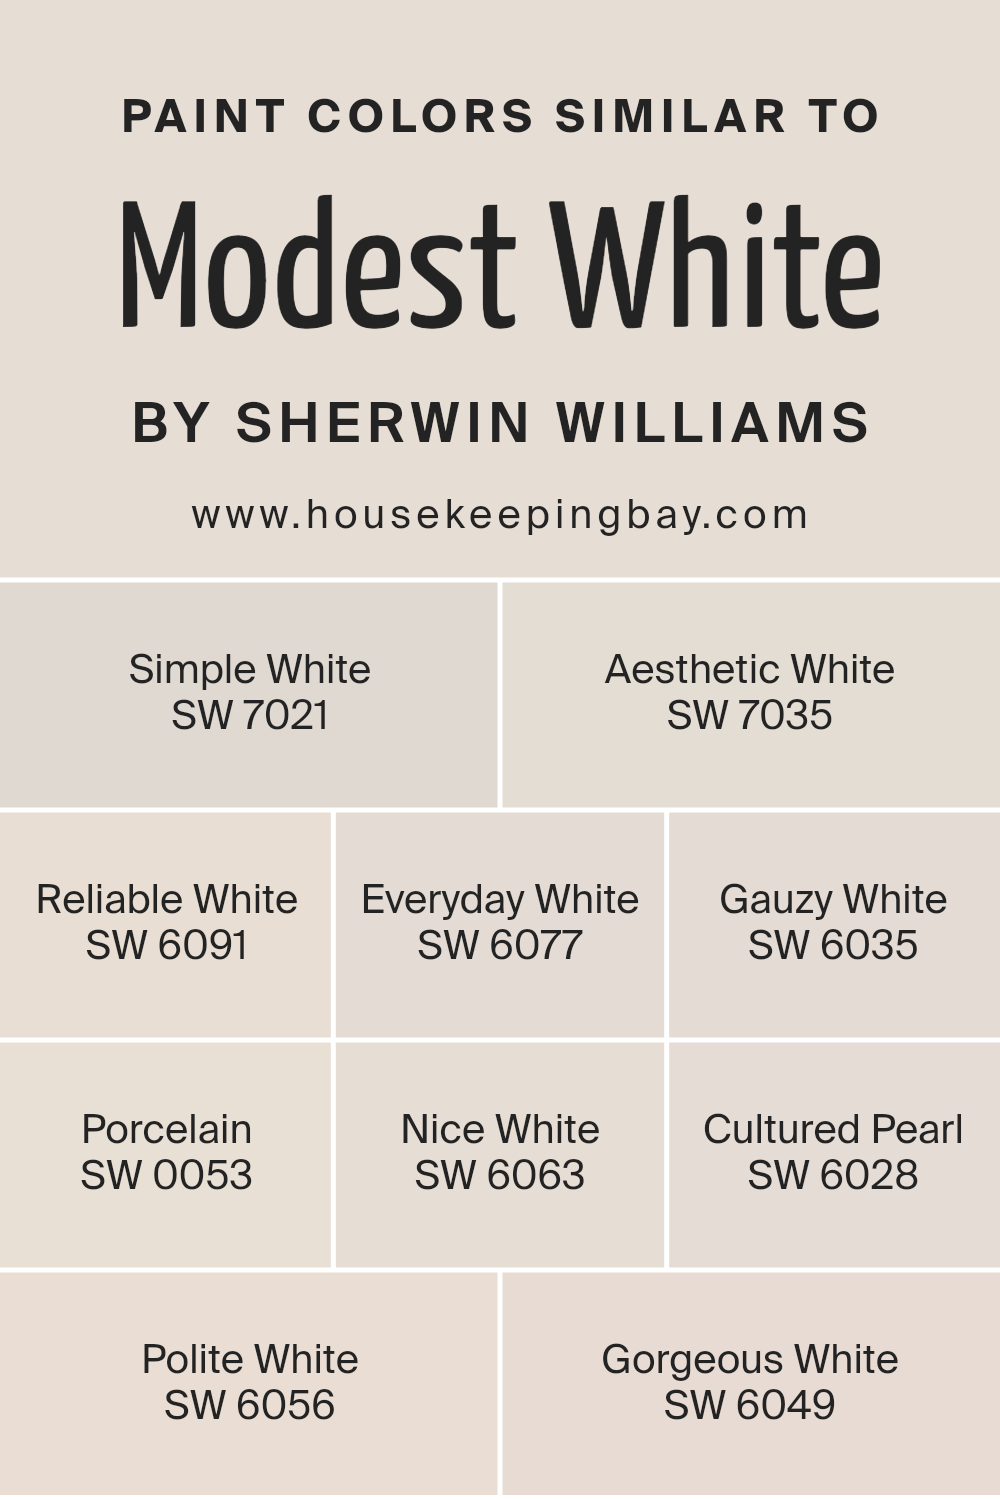 colors_similar_to_modest_white_sw_6084